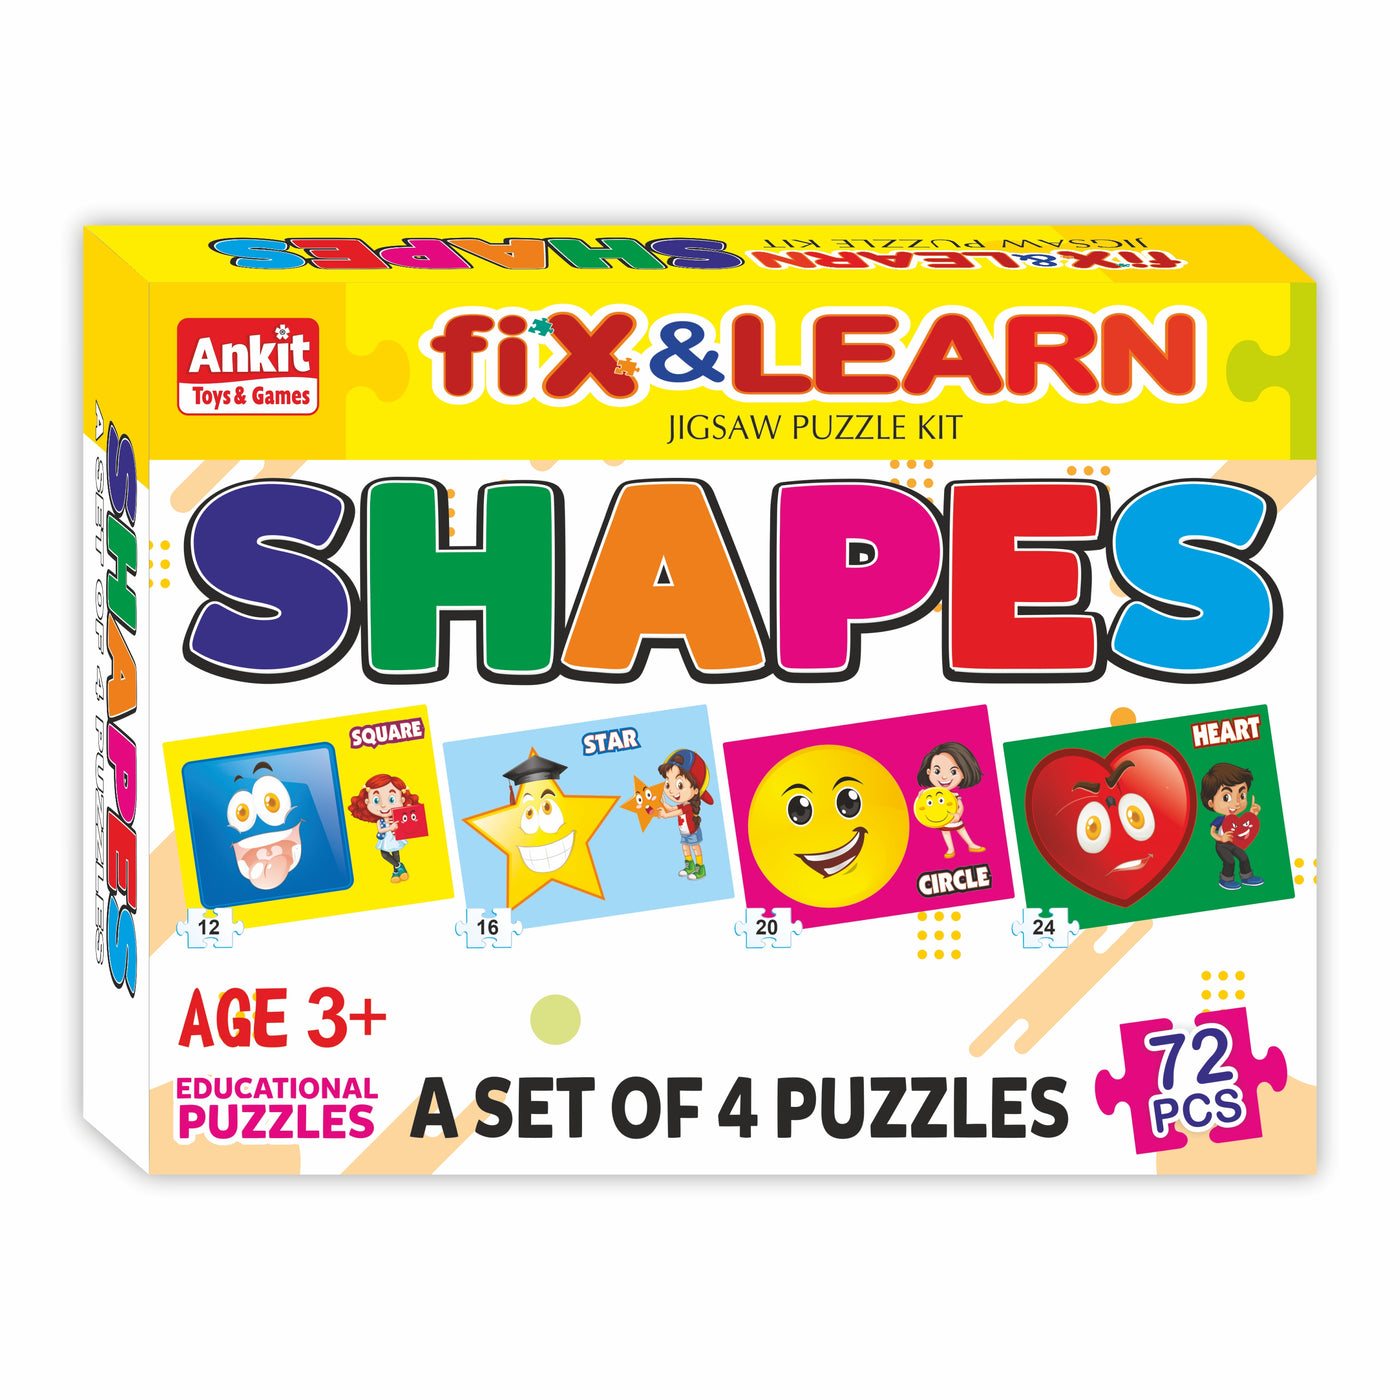 Fix 'n' Learn Shapes Puzzle